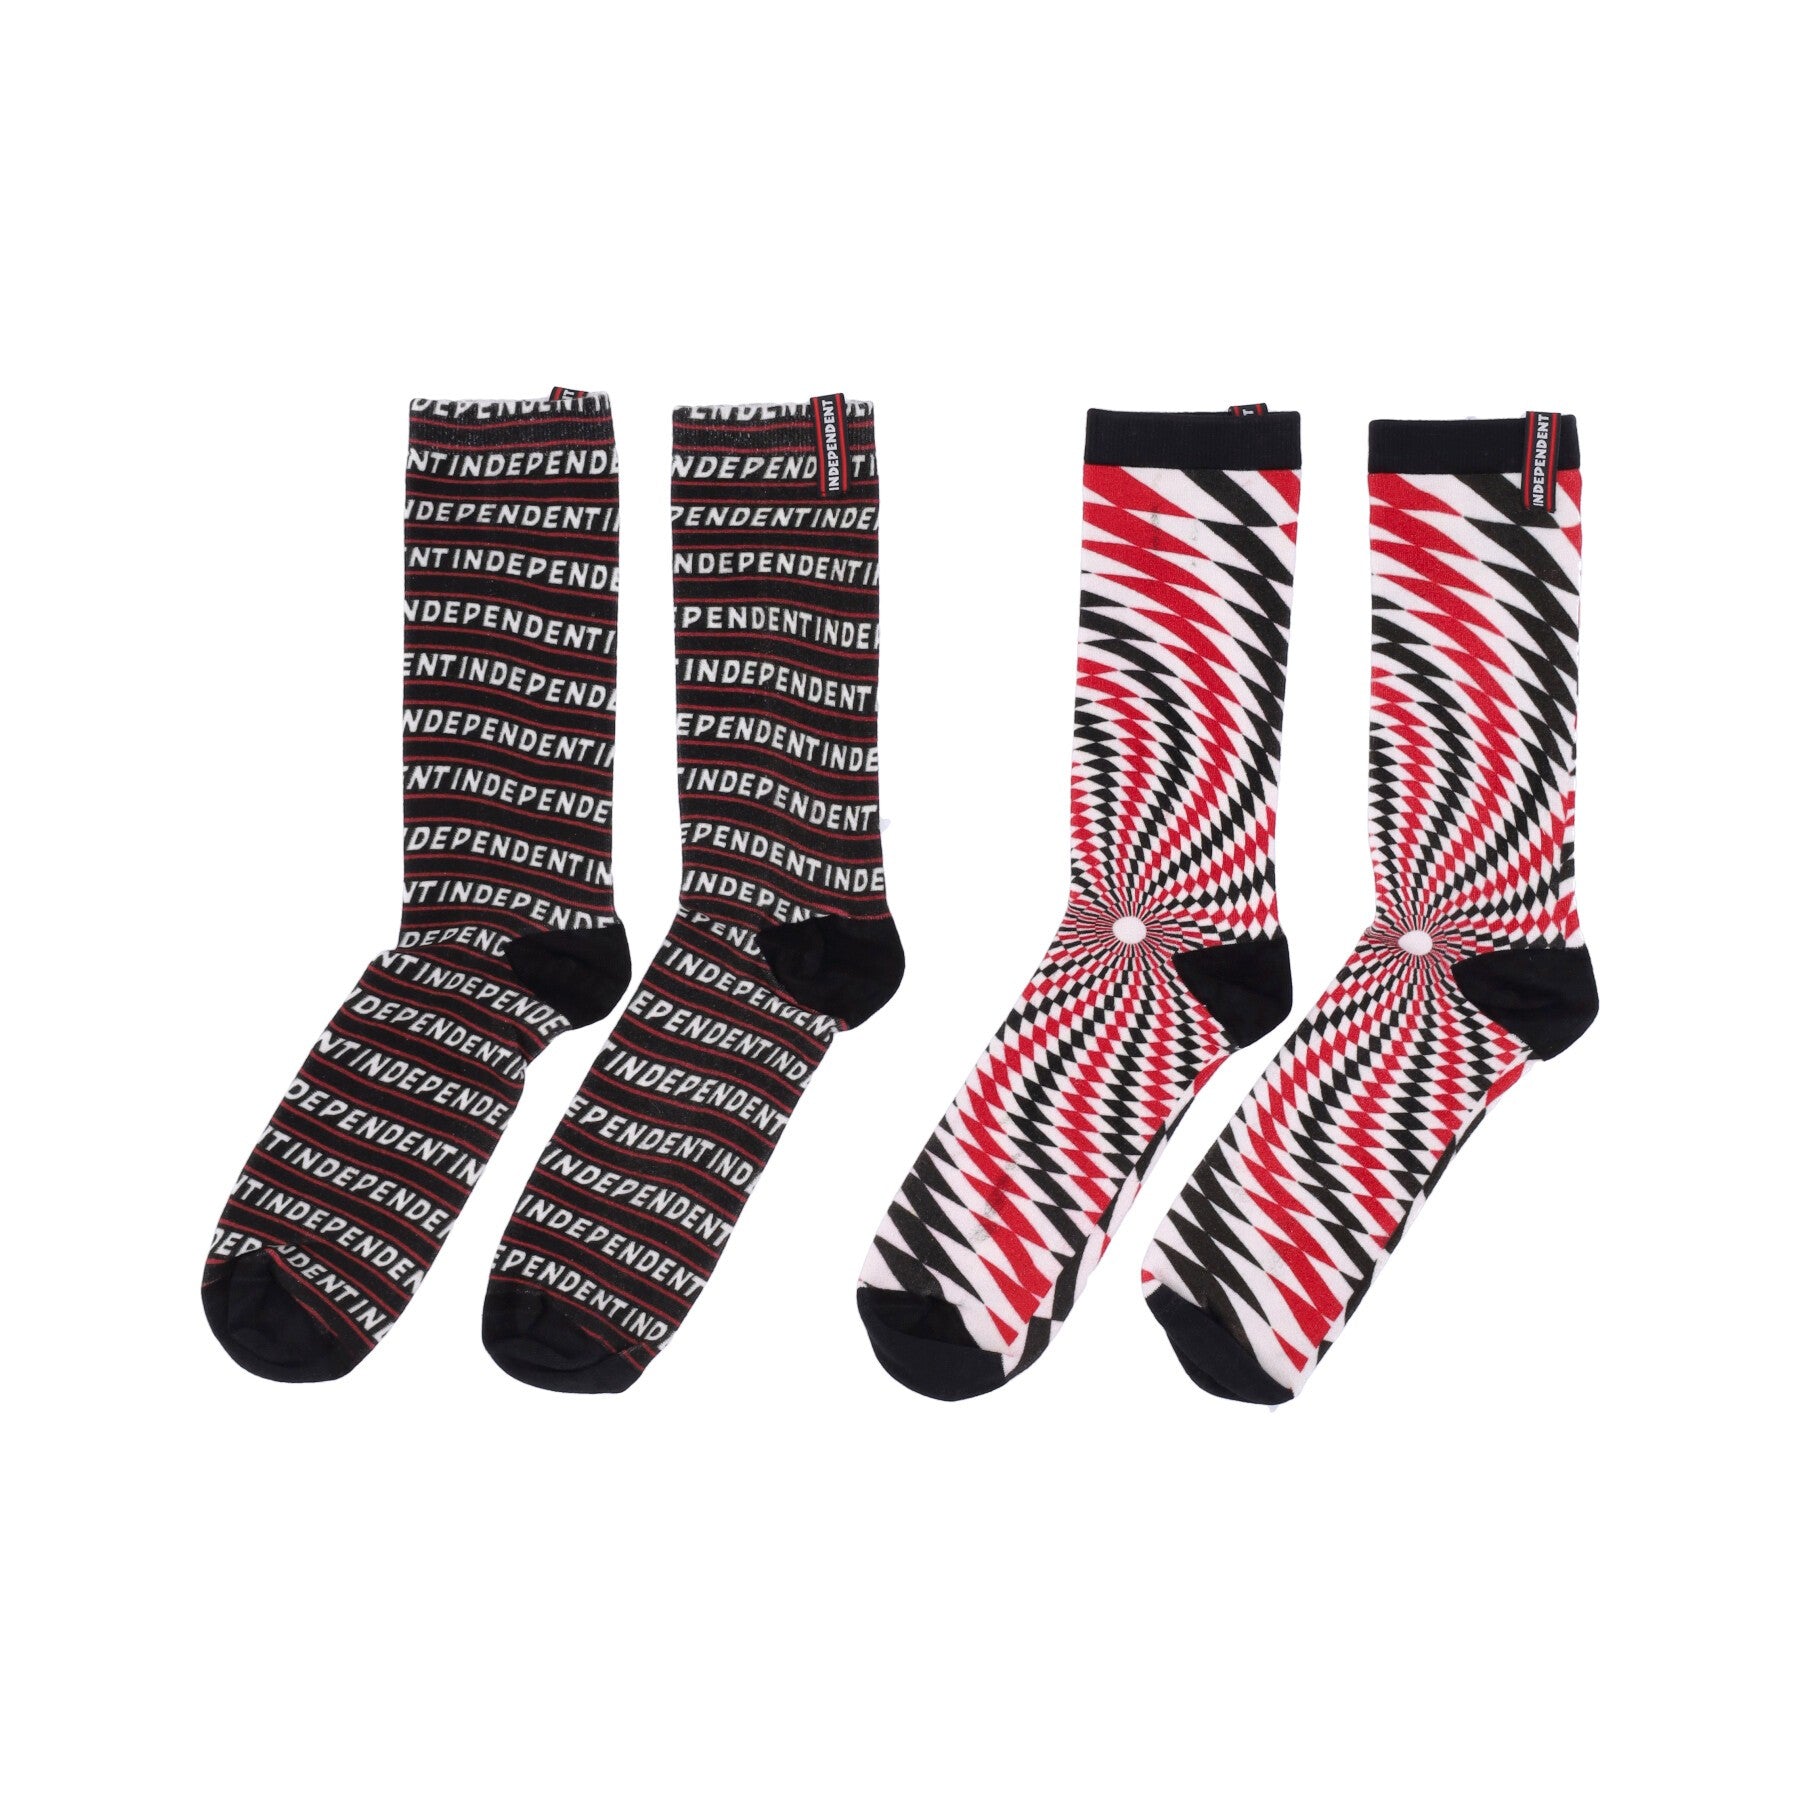 Independent, Calza Media Uomo Abyss Socks ( 2 Pack), Multi